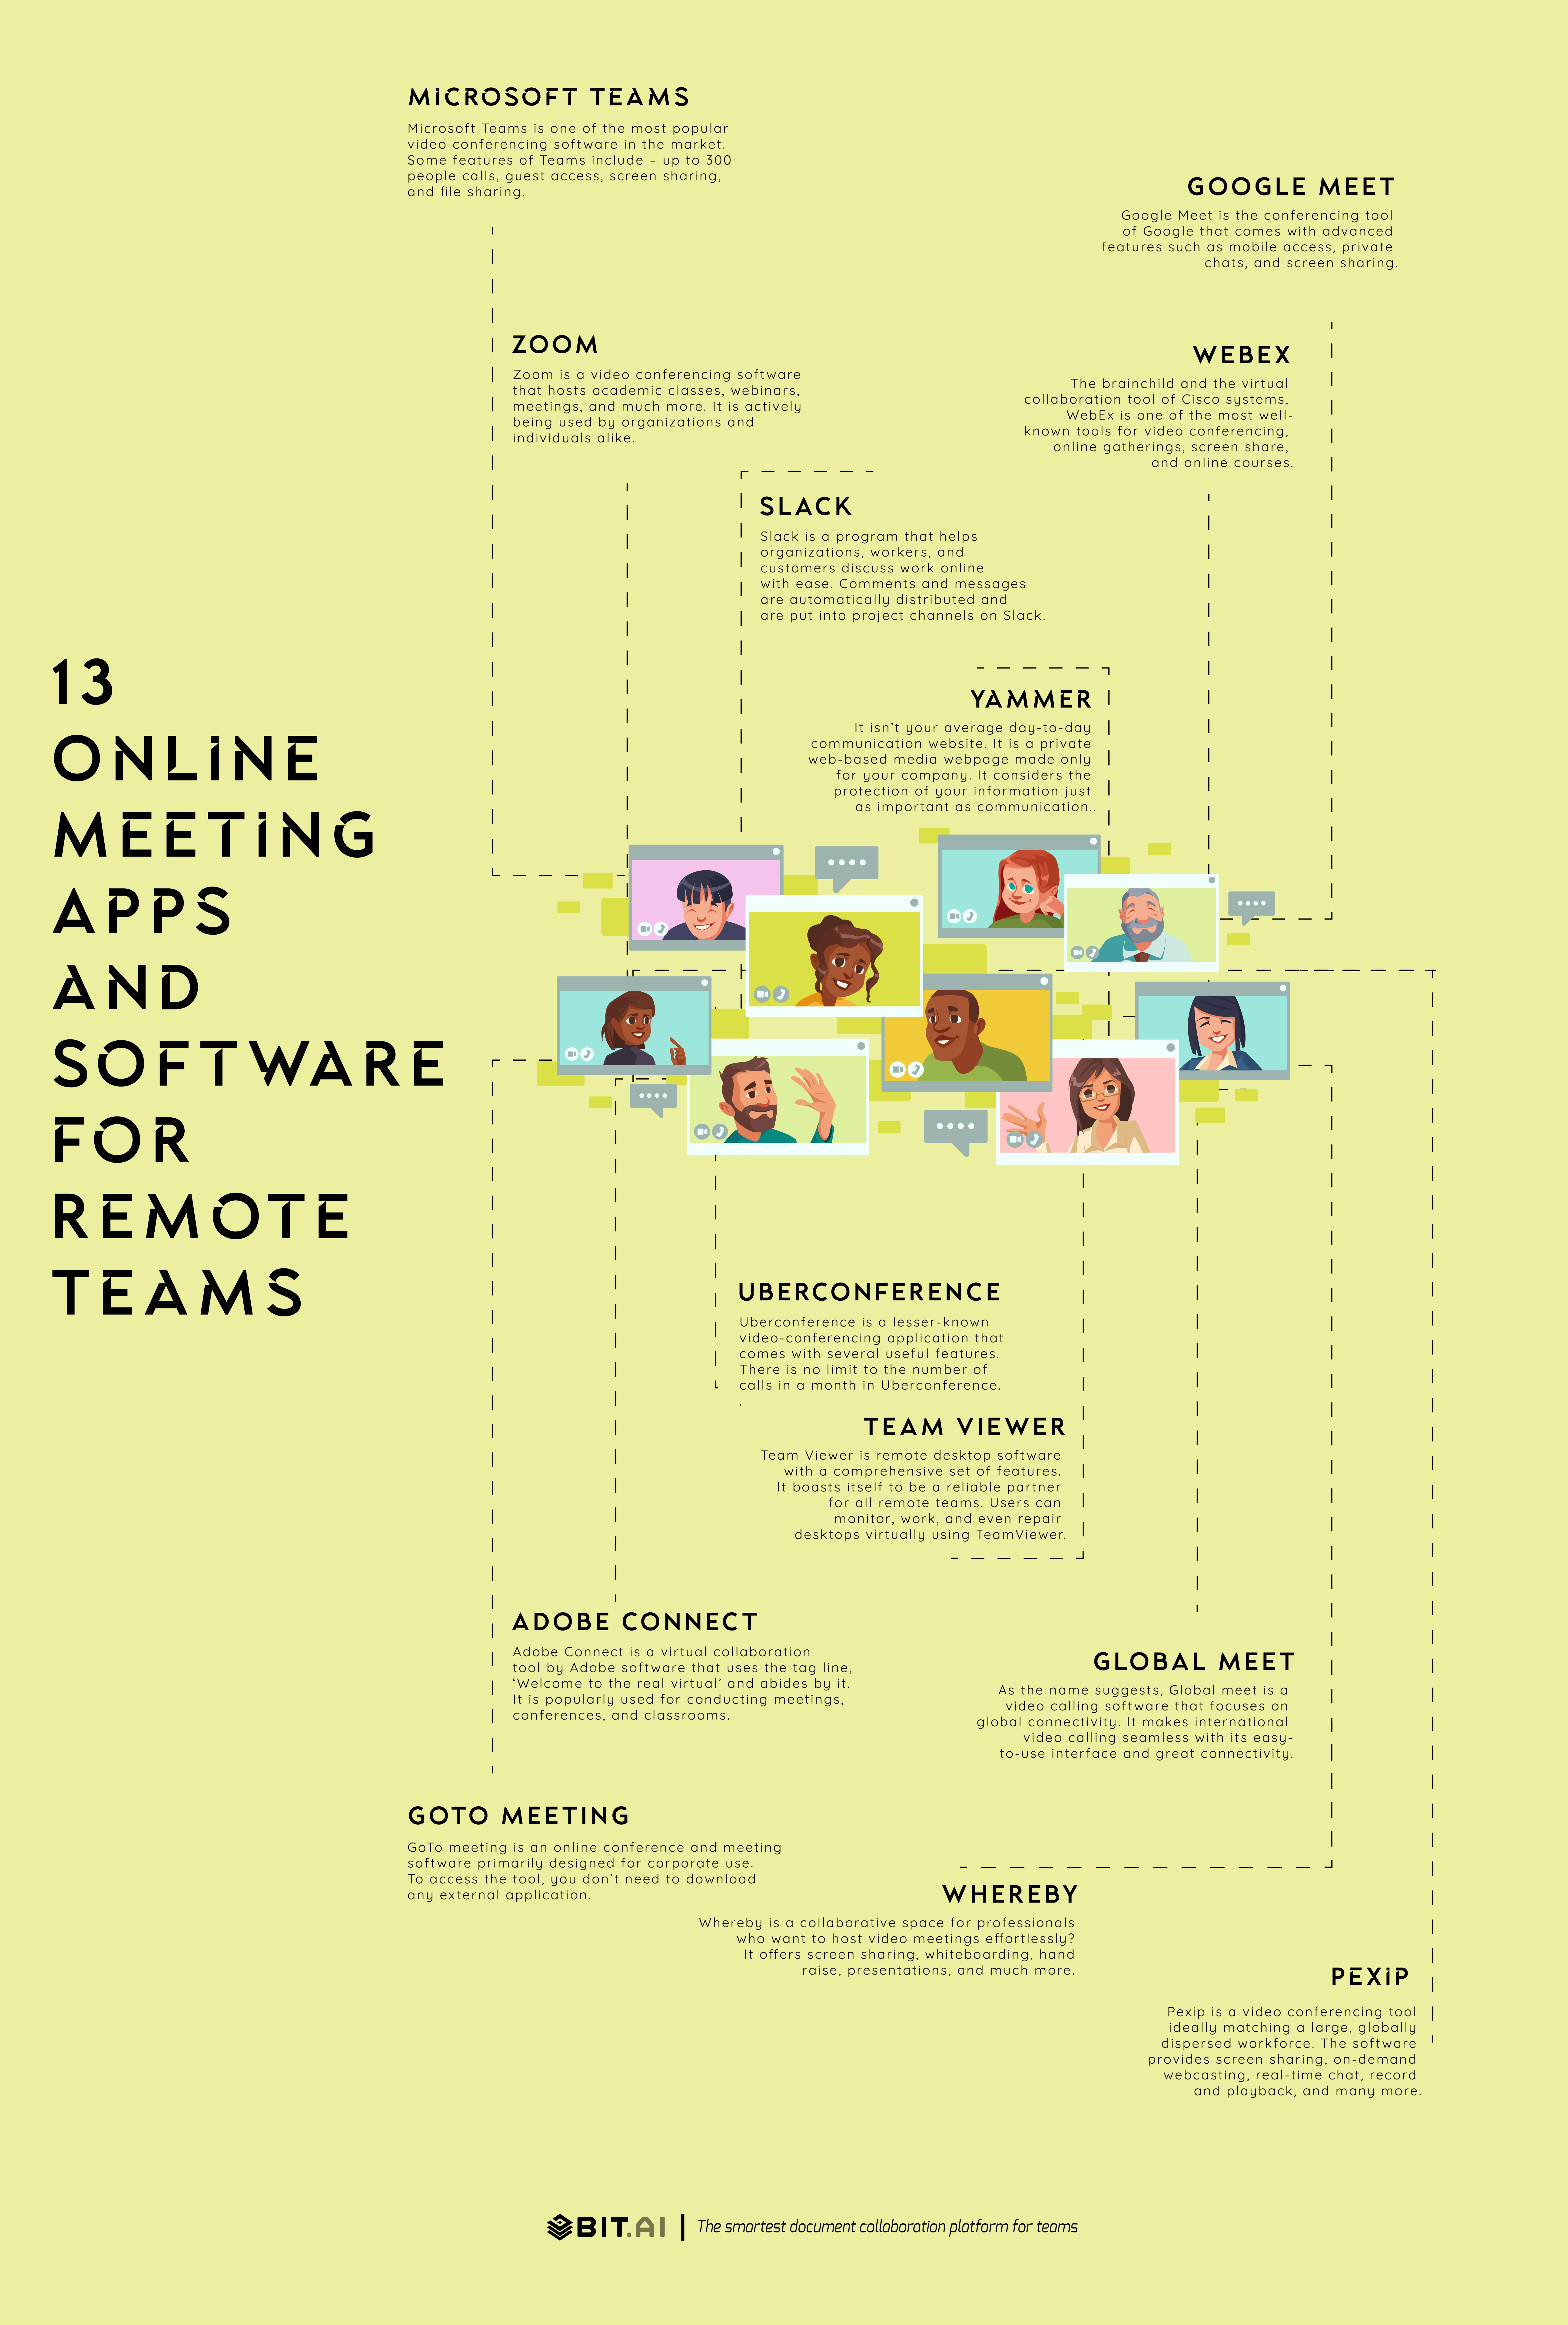 Online meeting apps and tools infographic